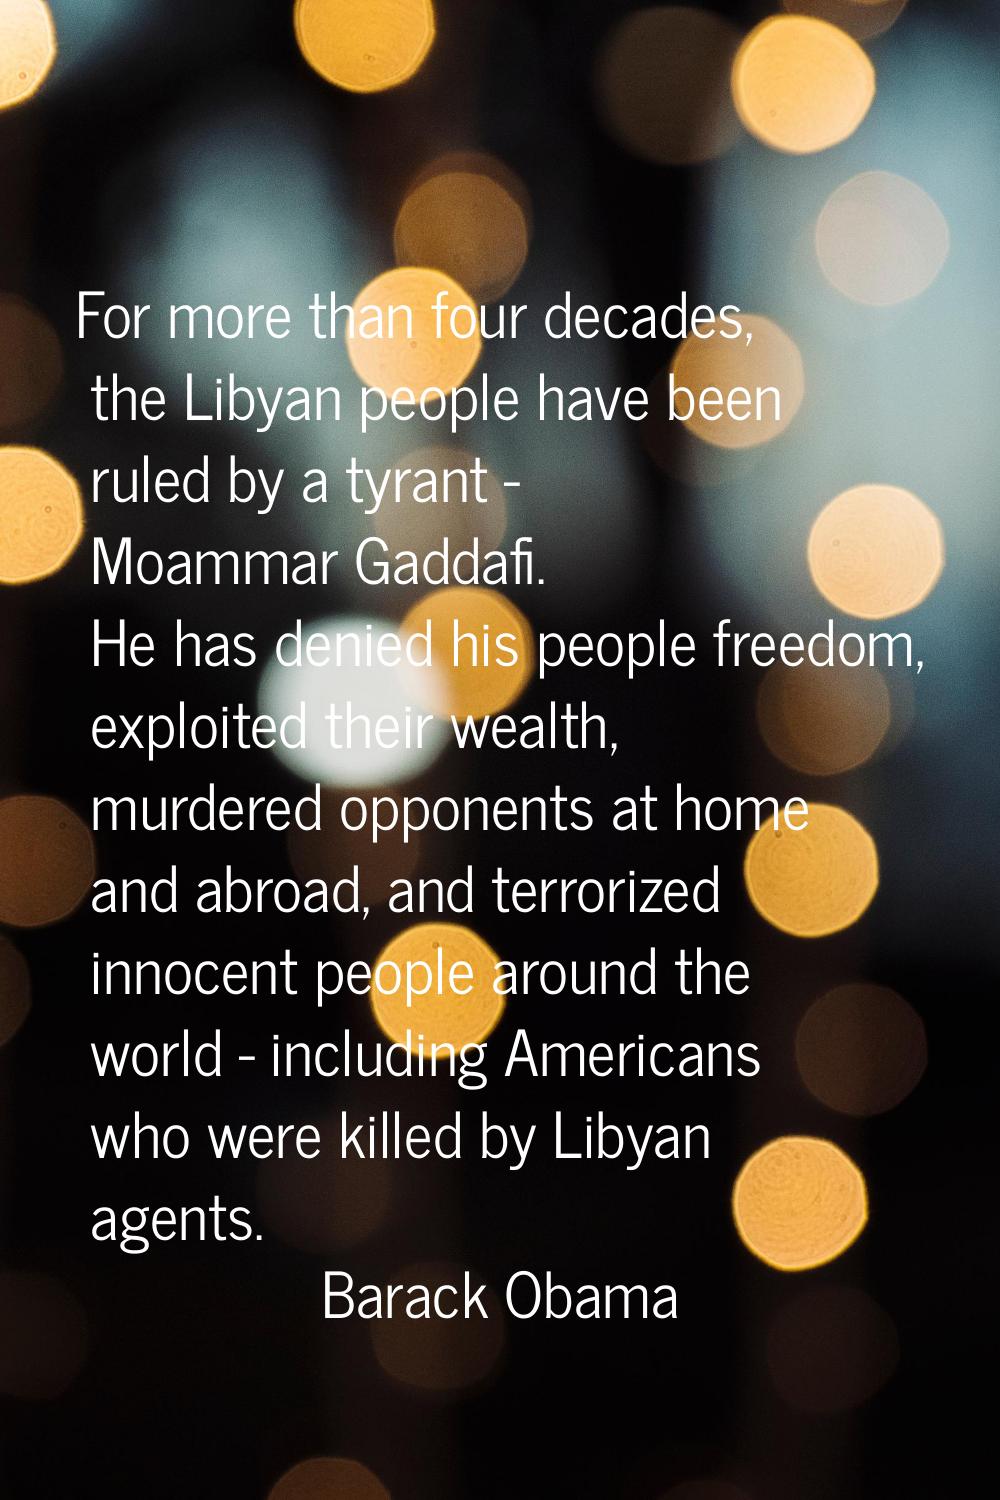 For more than four decades, the Libyan people have been ruled by a tyrant - Moammar Gaddafi. He has